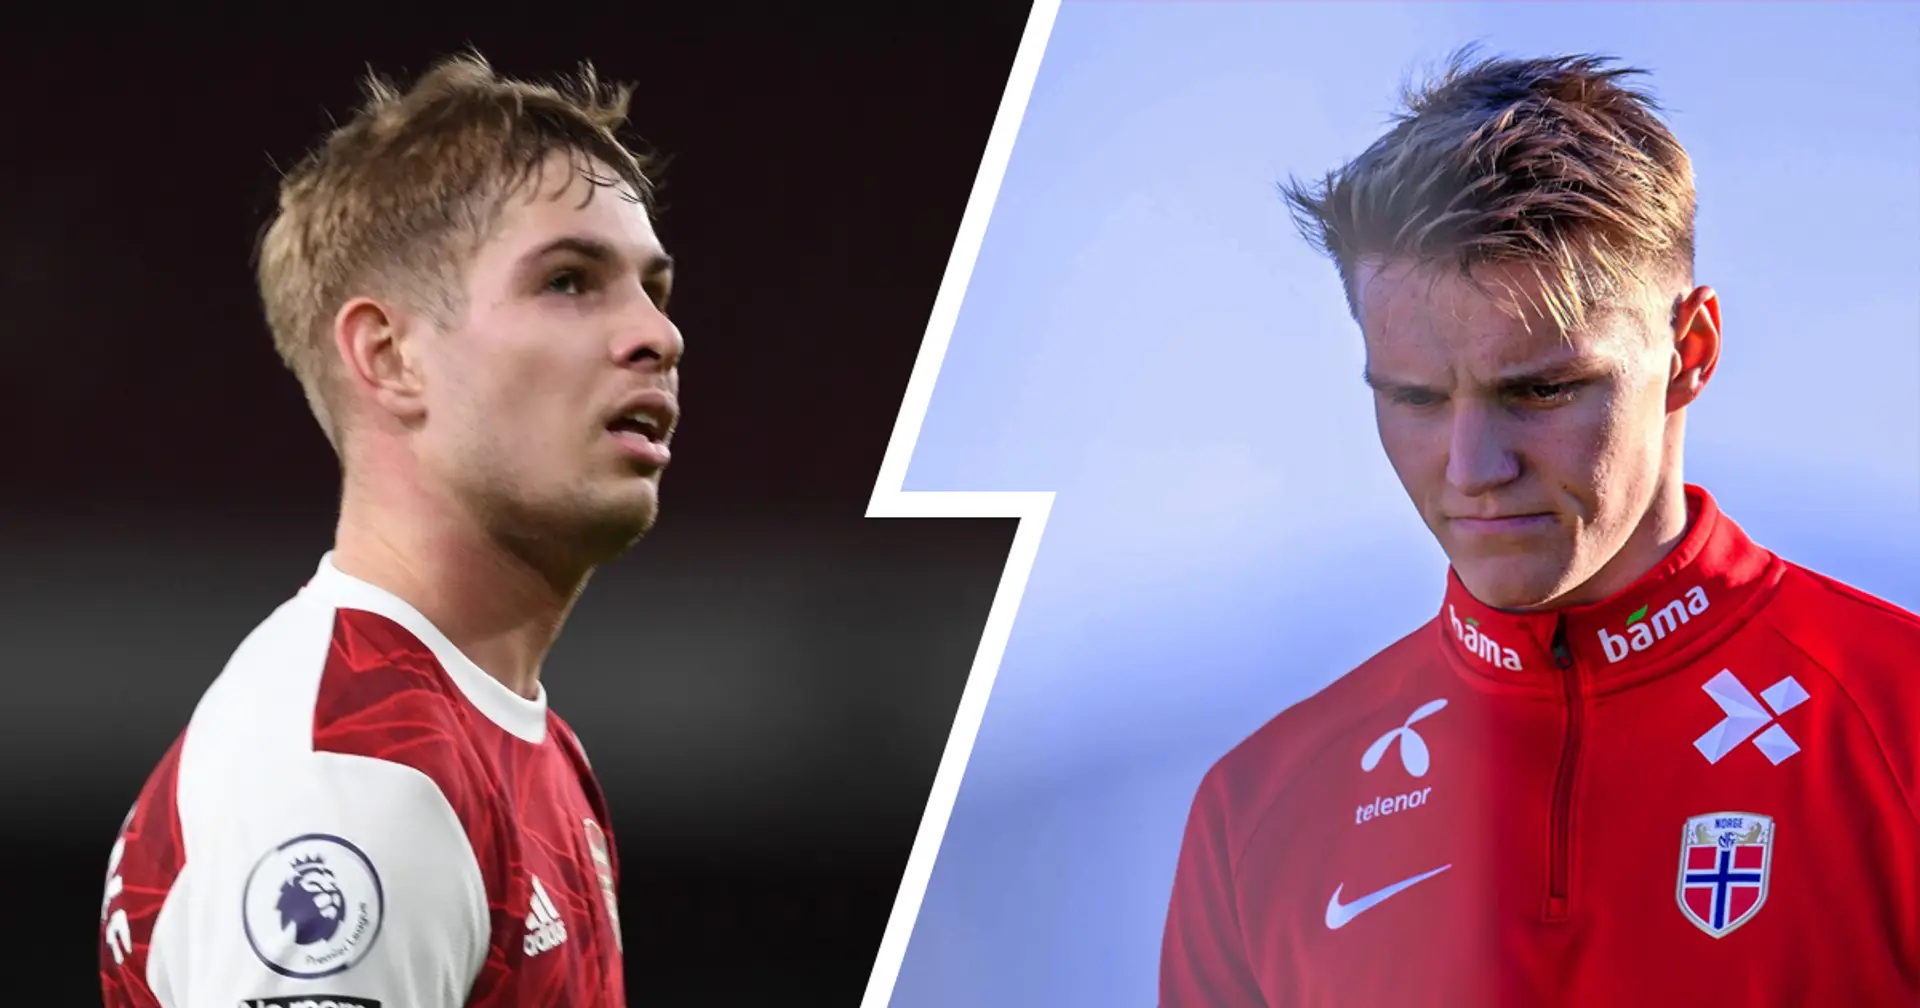 'Smith Rowe has done unreal things, he's a breath of fresh air at Arsenal': Ferdinand worried Odegaard could 'stunt' Emile's progress